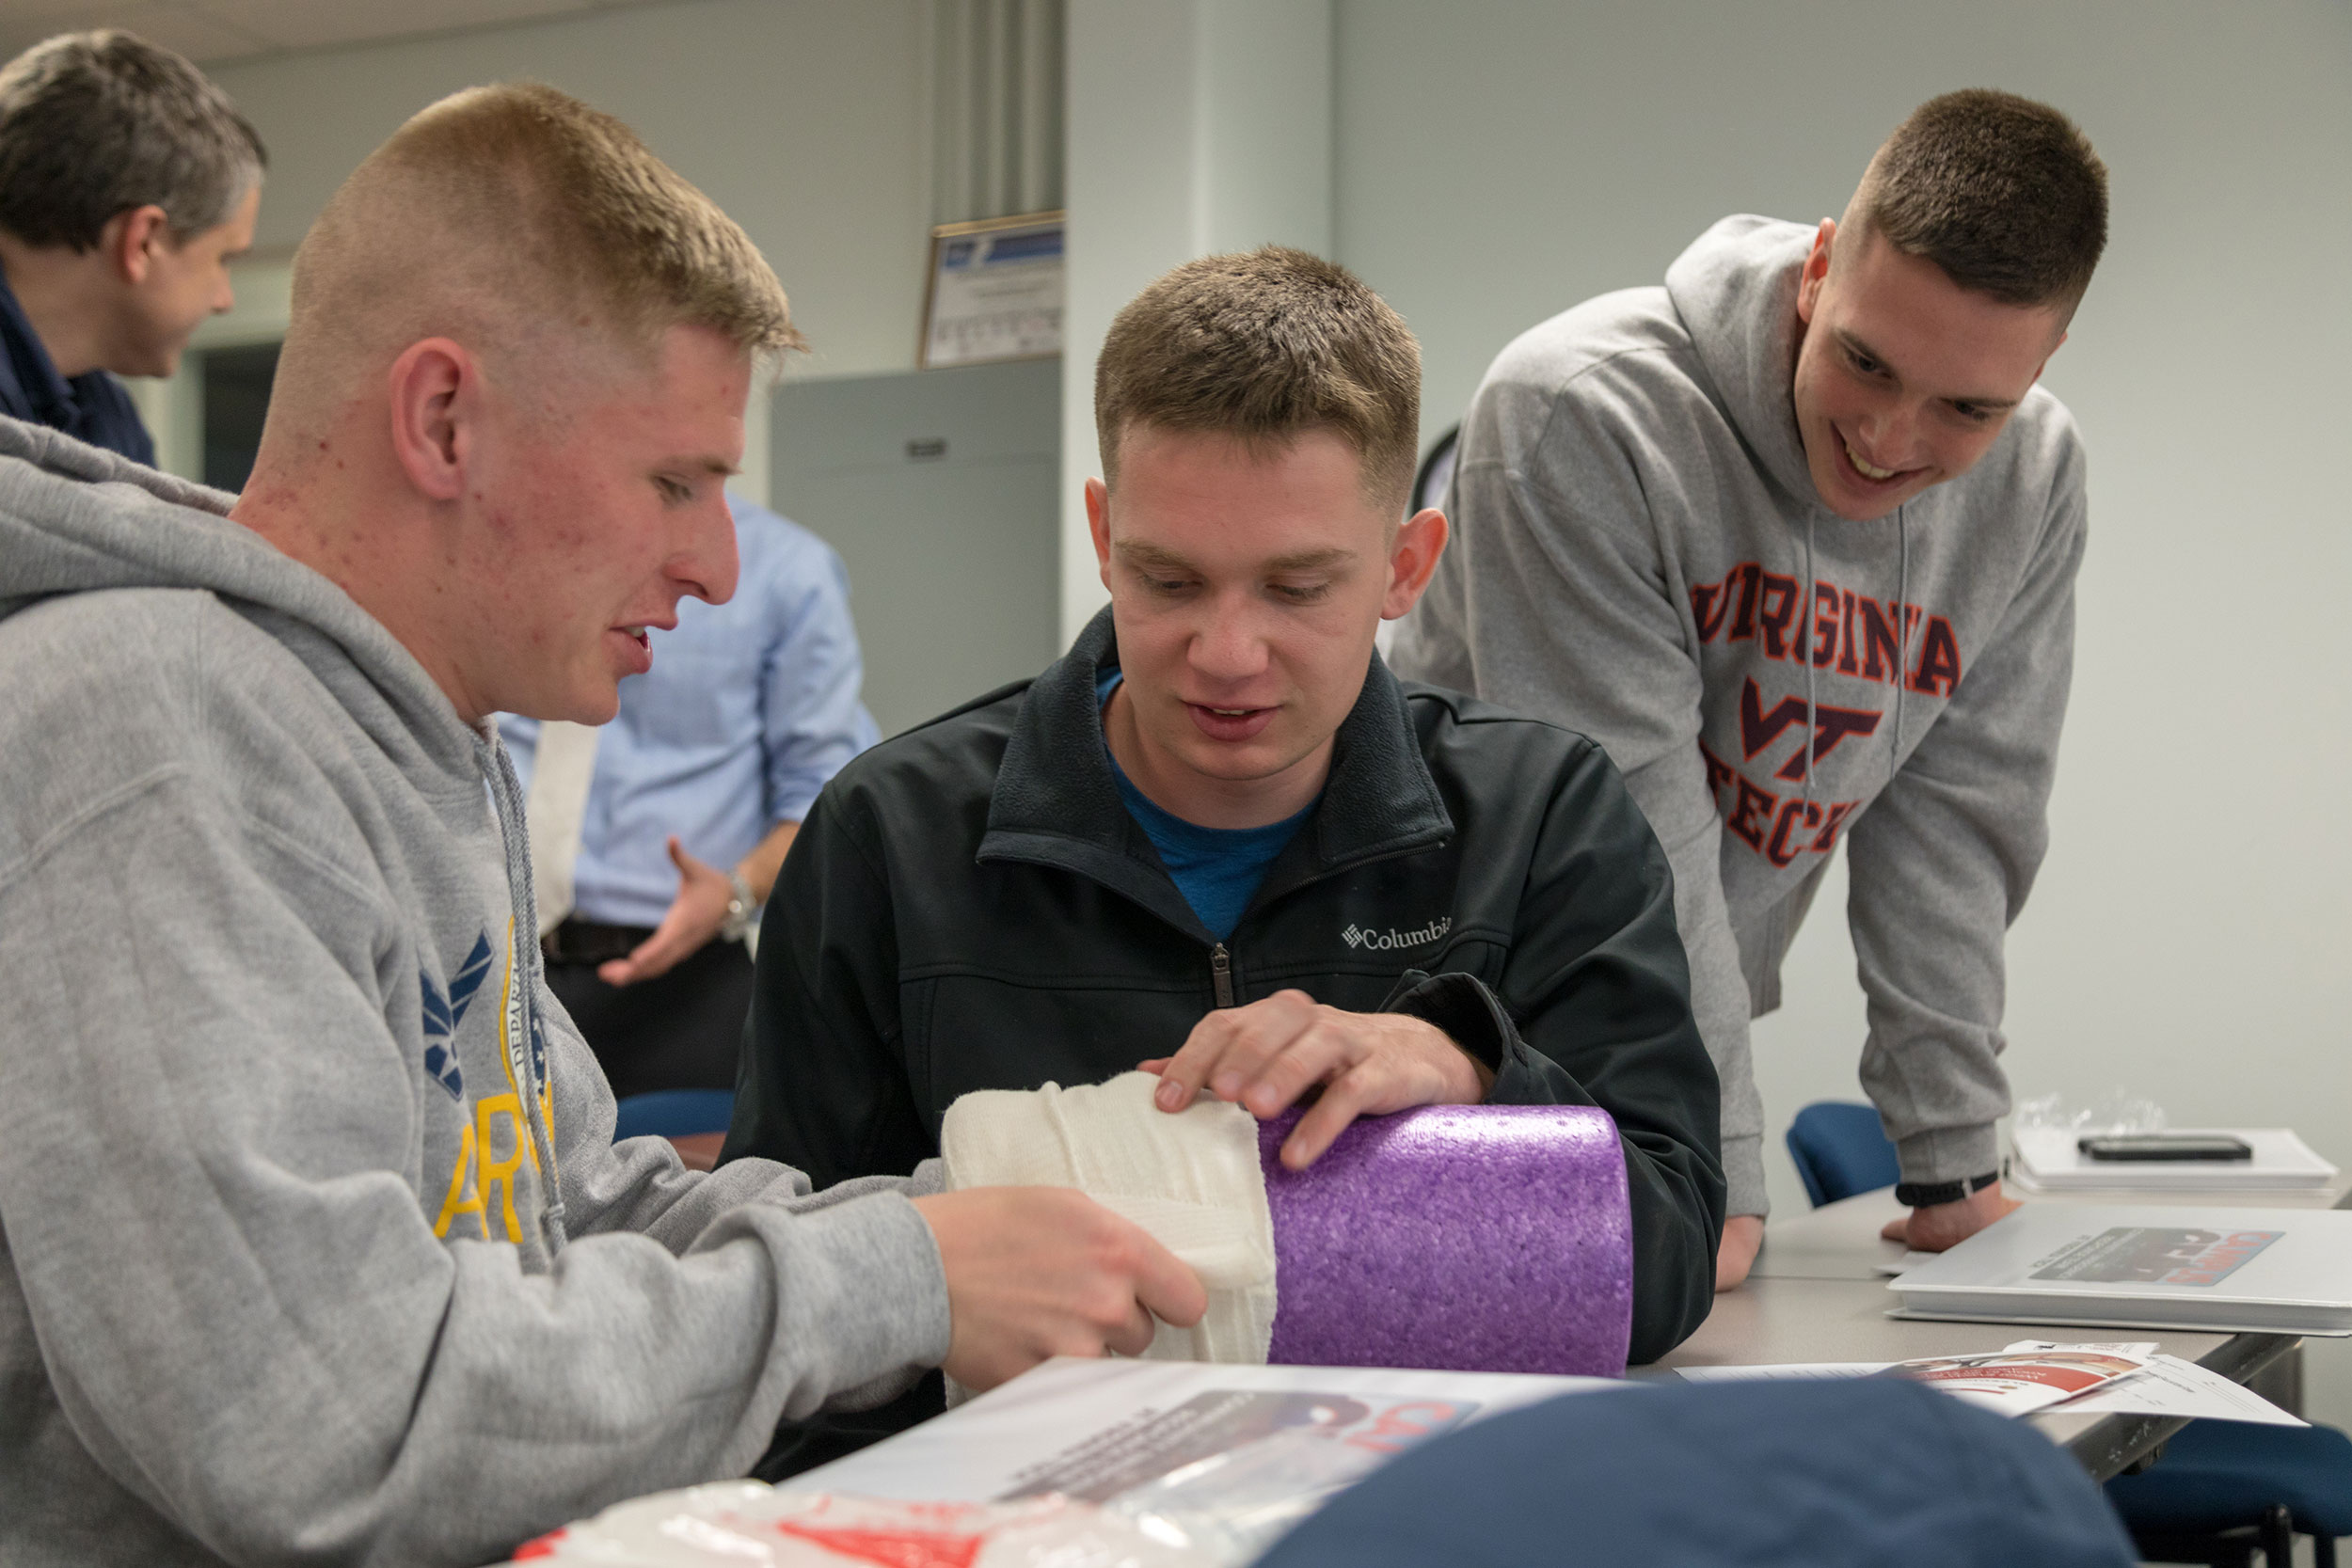 From left, sophomore meteorology majors Damion Freeman, Tyler Roiland, and Ben Blatchford practice dressing a wound during the Stop the Bleed class.